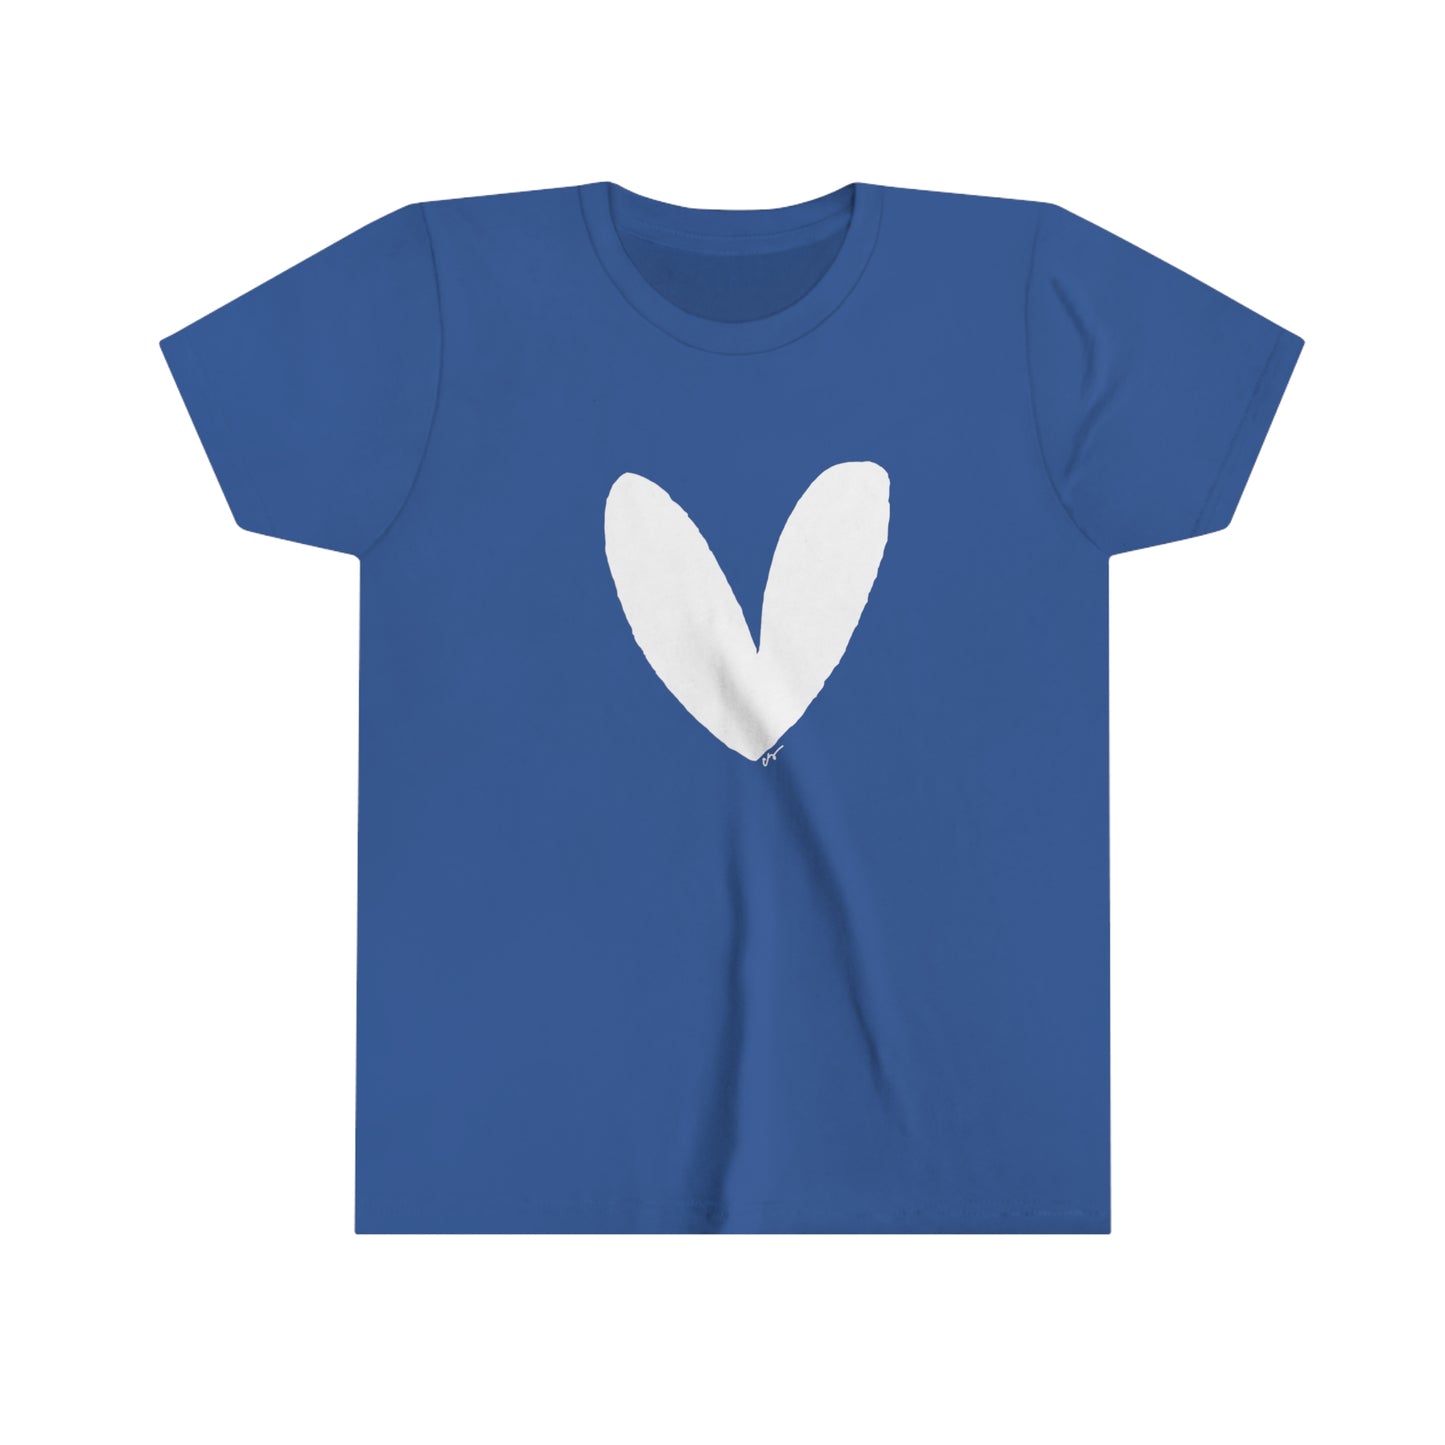 Have A Heart Kids Tee (White Heart)